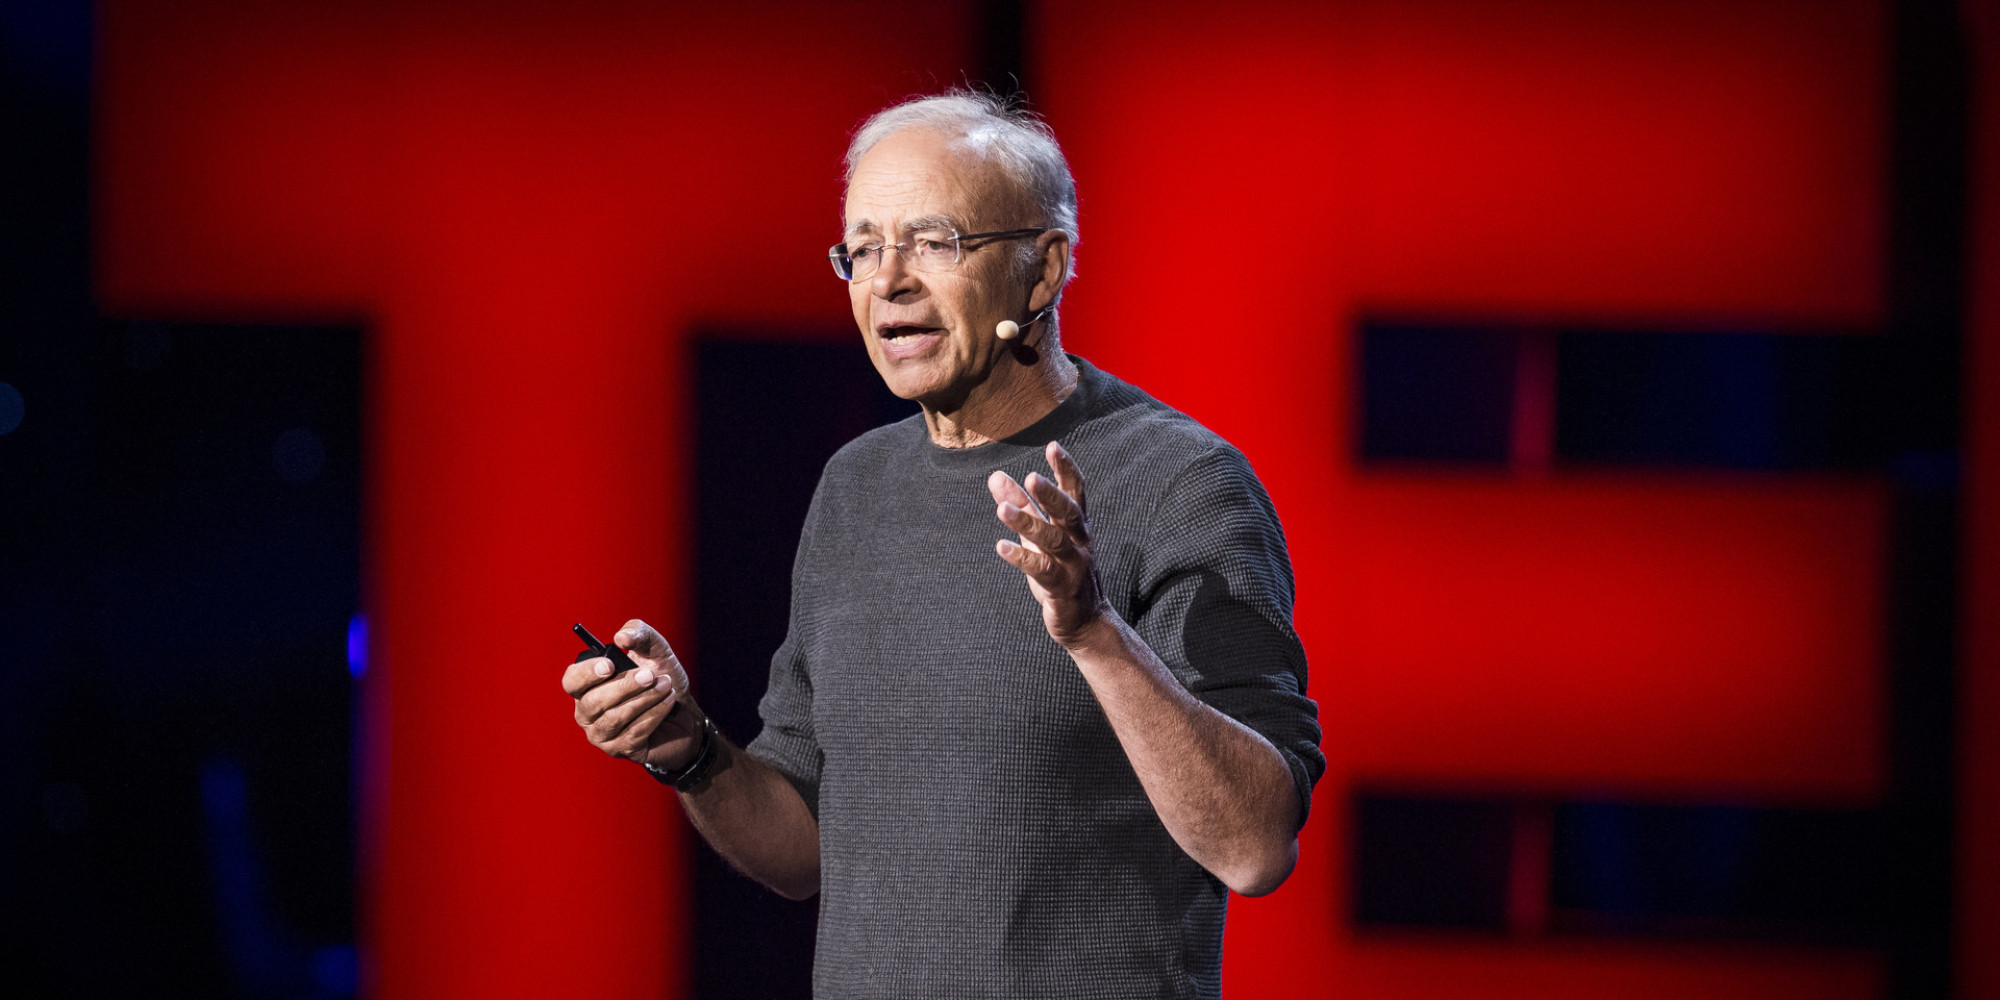 What makes life worth living? Well, not Peter Singer